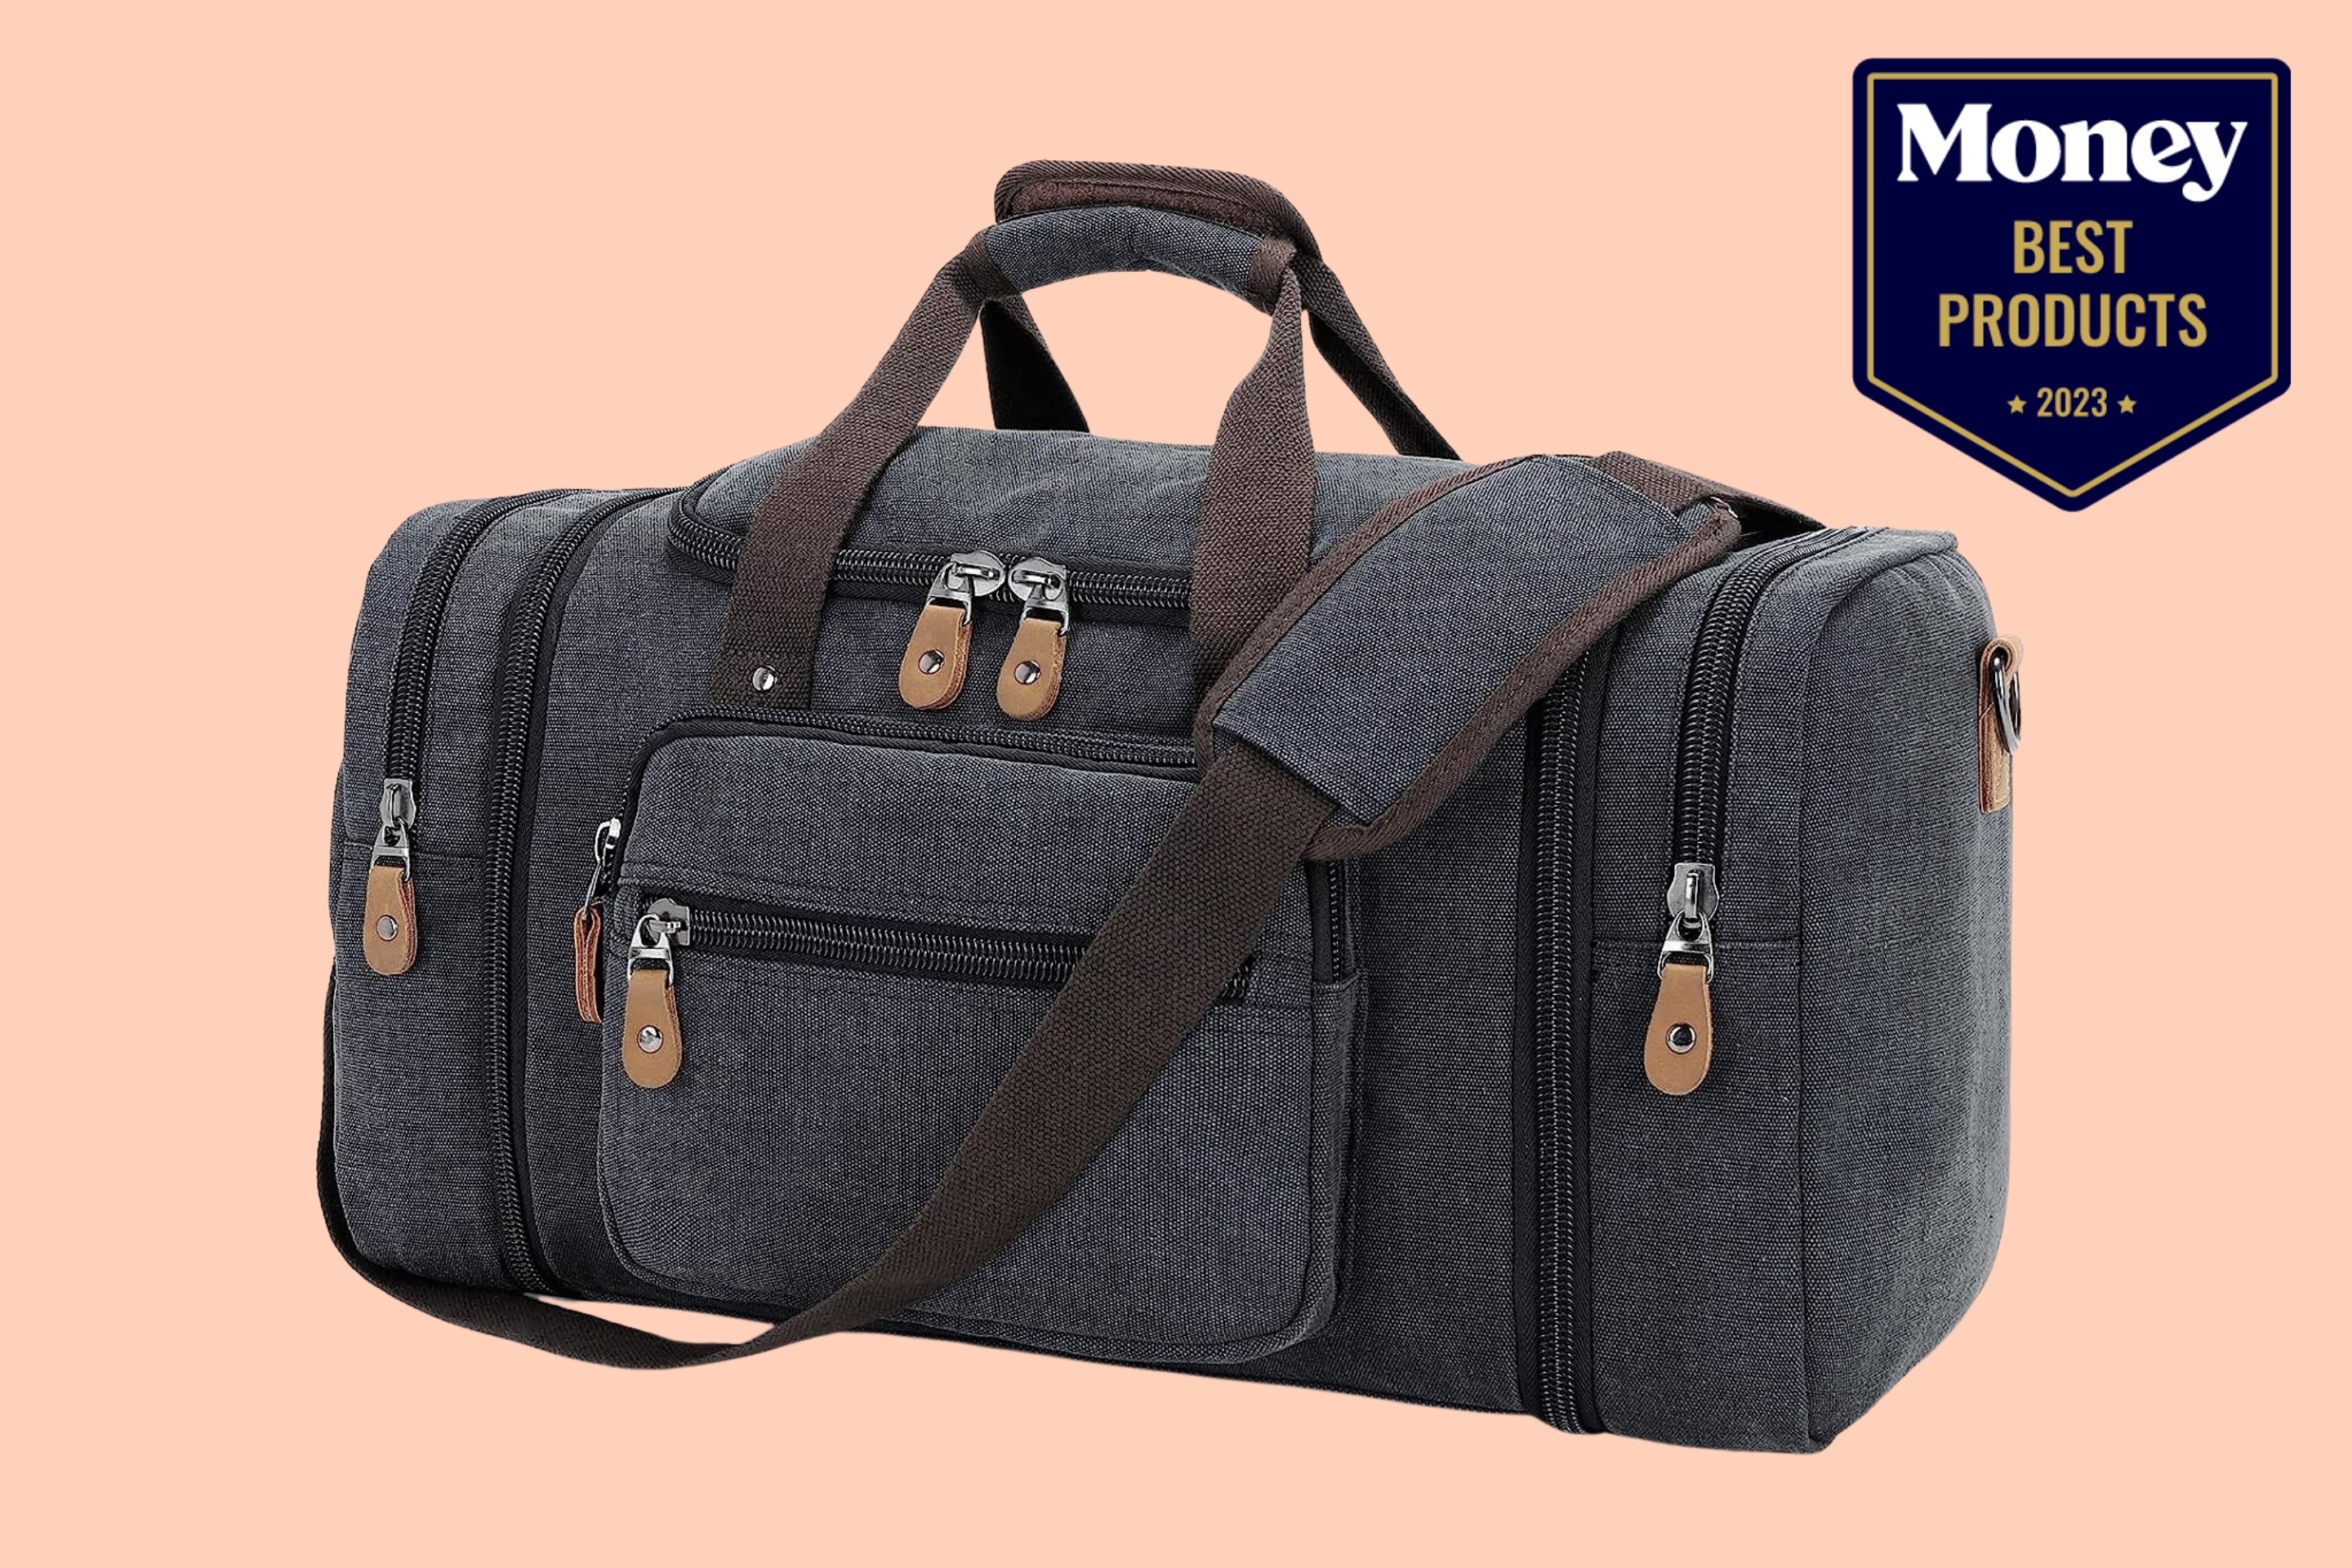 Men's Leather Duffle Bag Classic Travel Holdall Cabin 